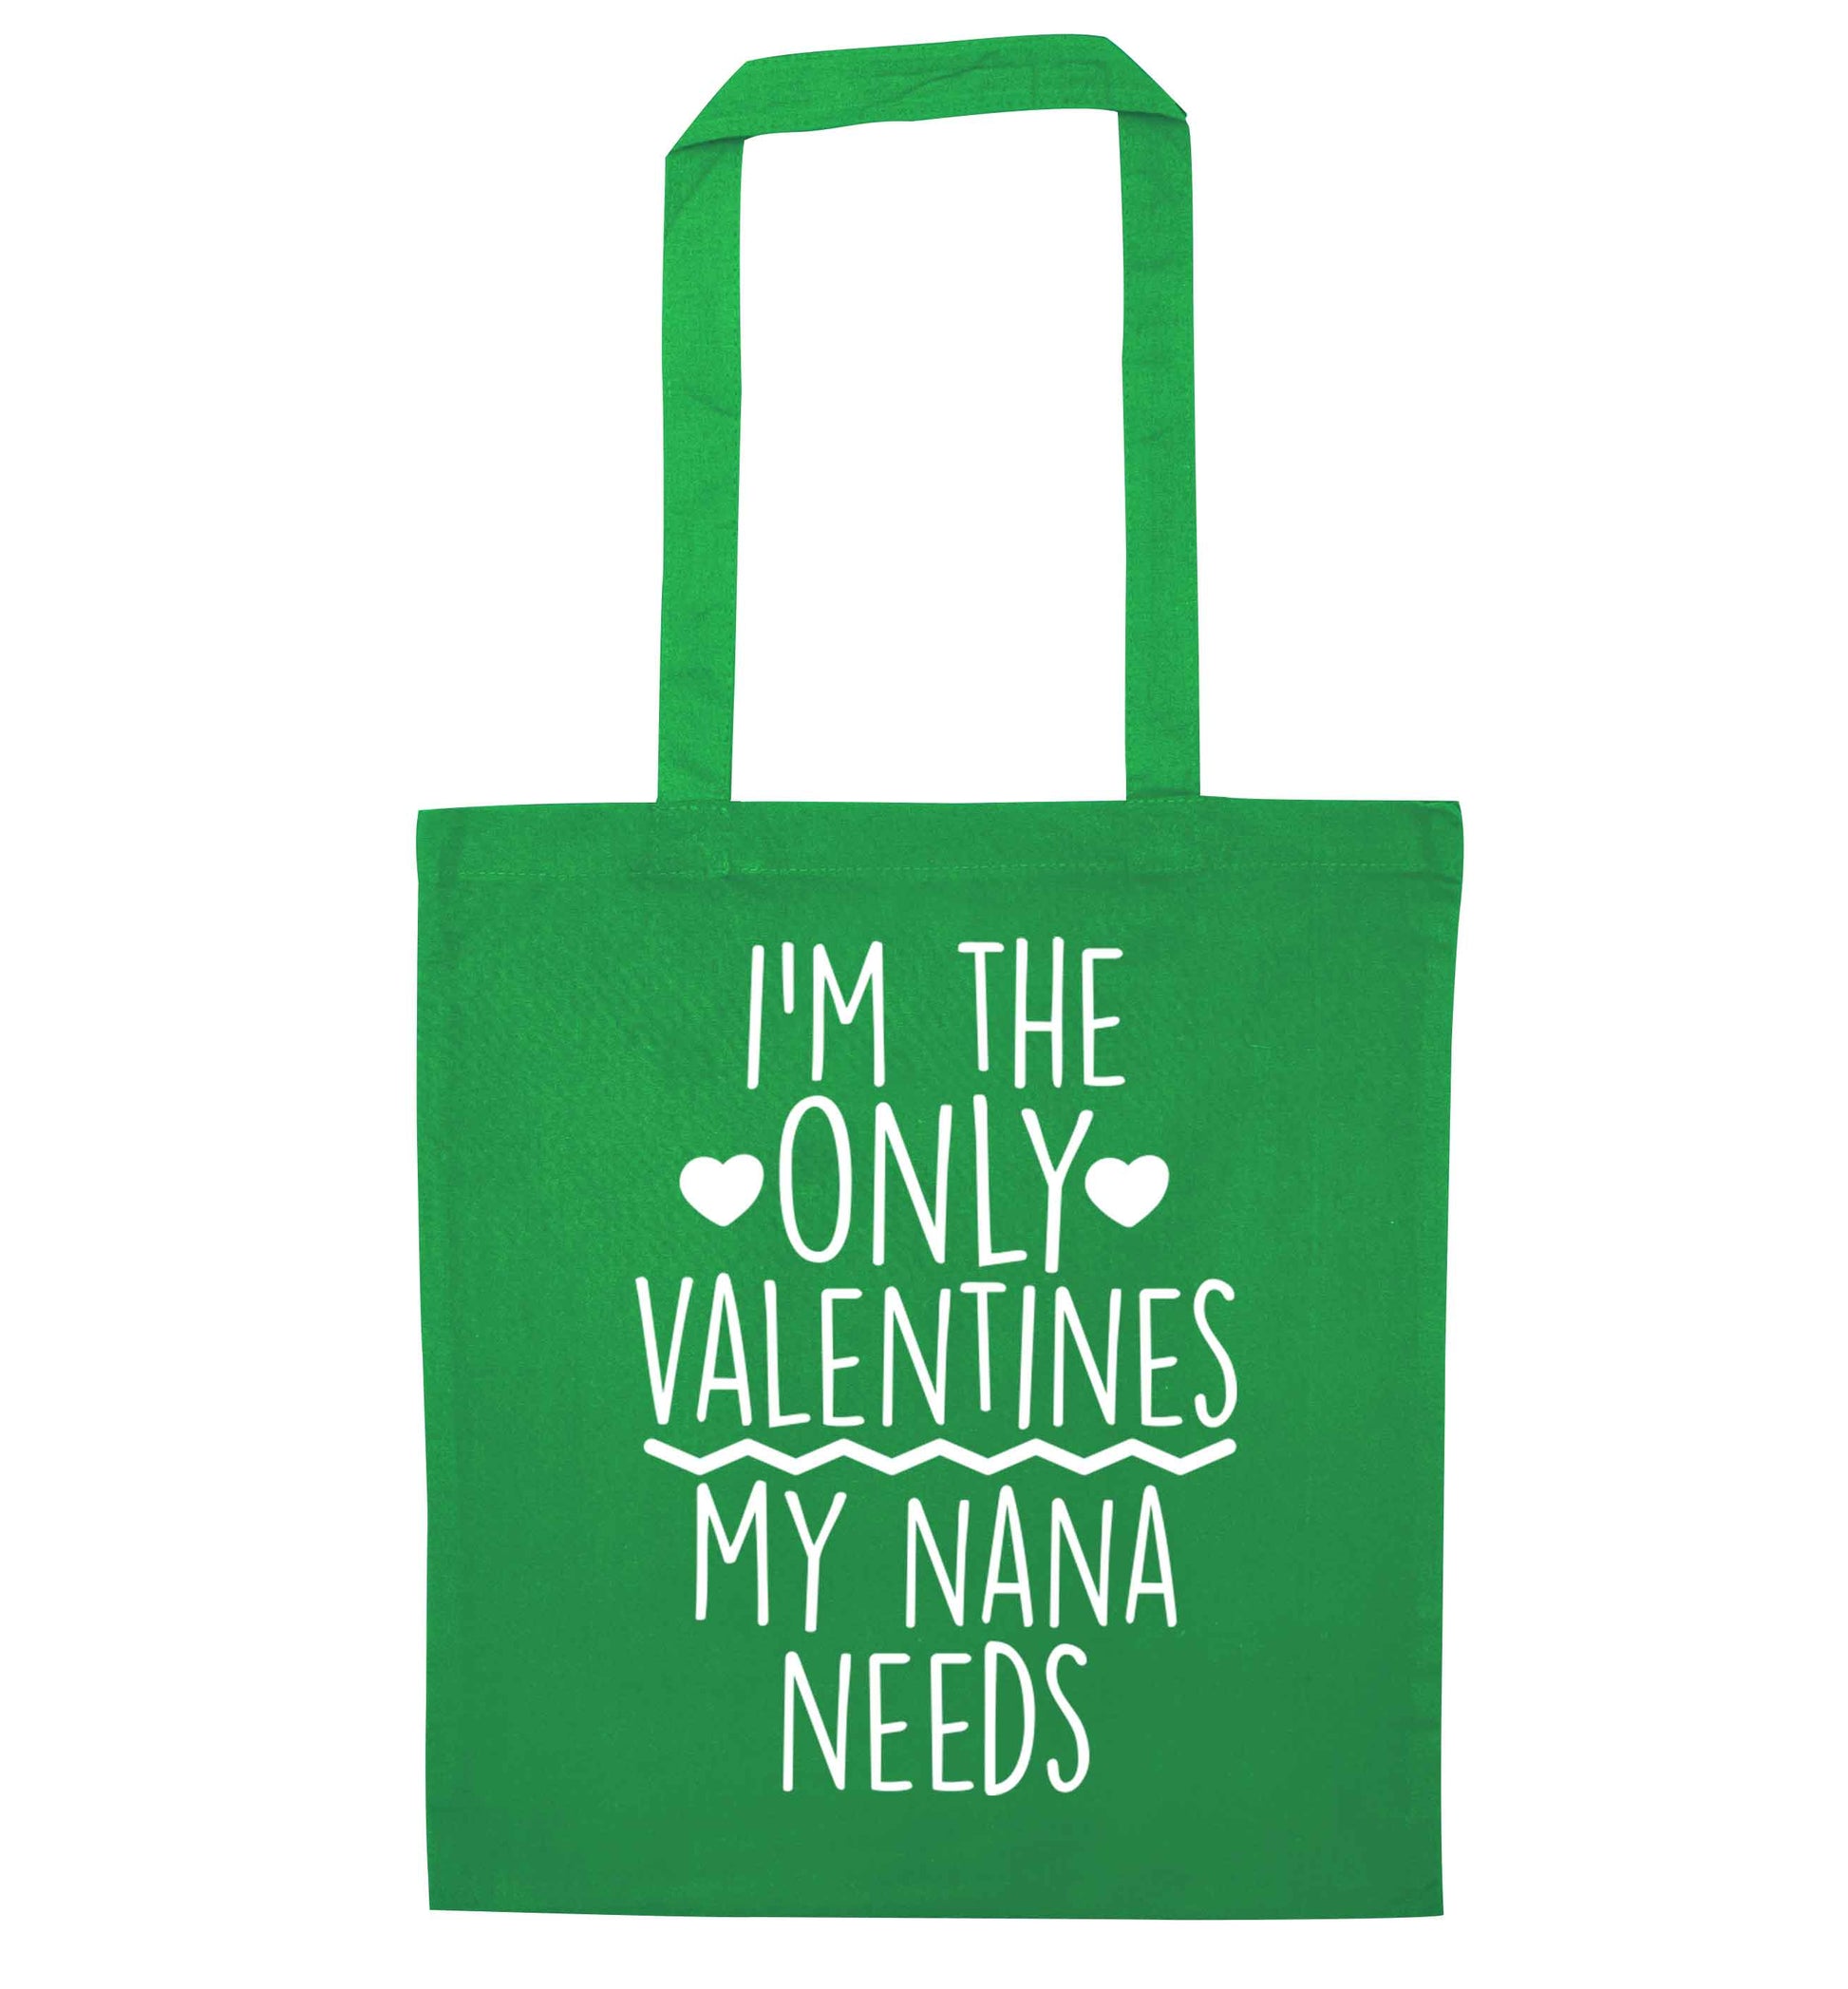 I'm the only valentines my nana needs green tote bag